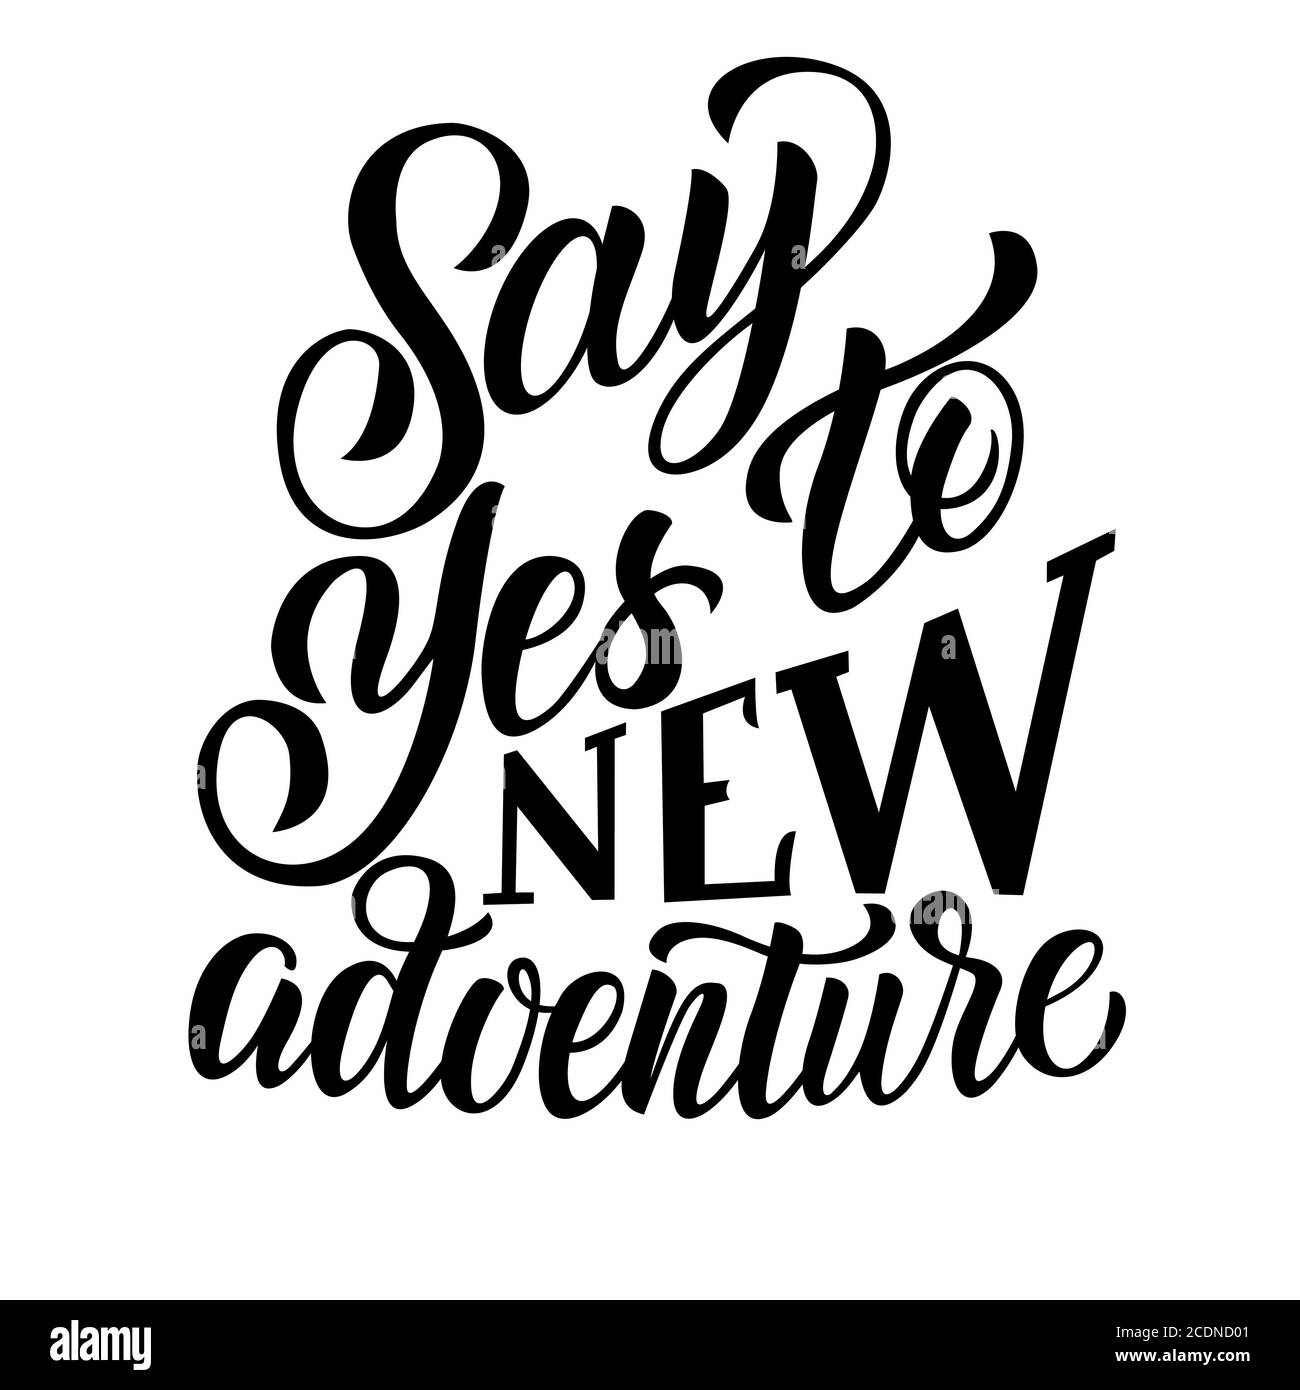 Say yes to new adventure - vector lettering on white background. For the design of postcards, posters, covers, prints for mugs, t-shirts, backpacks Stock Vector